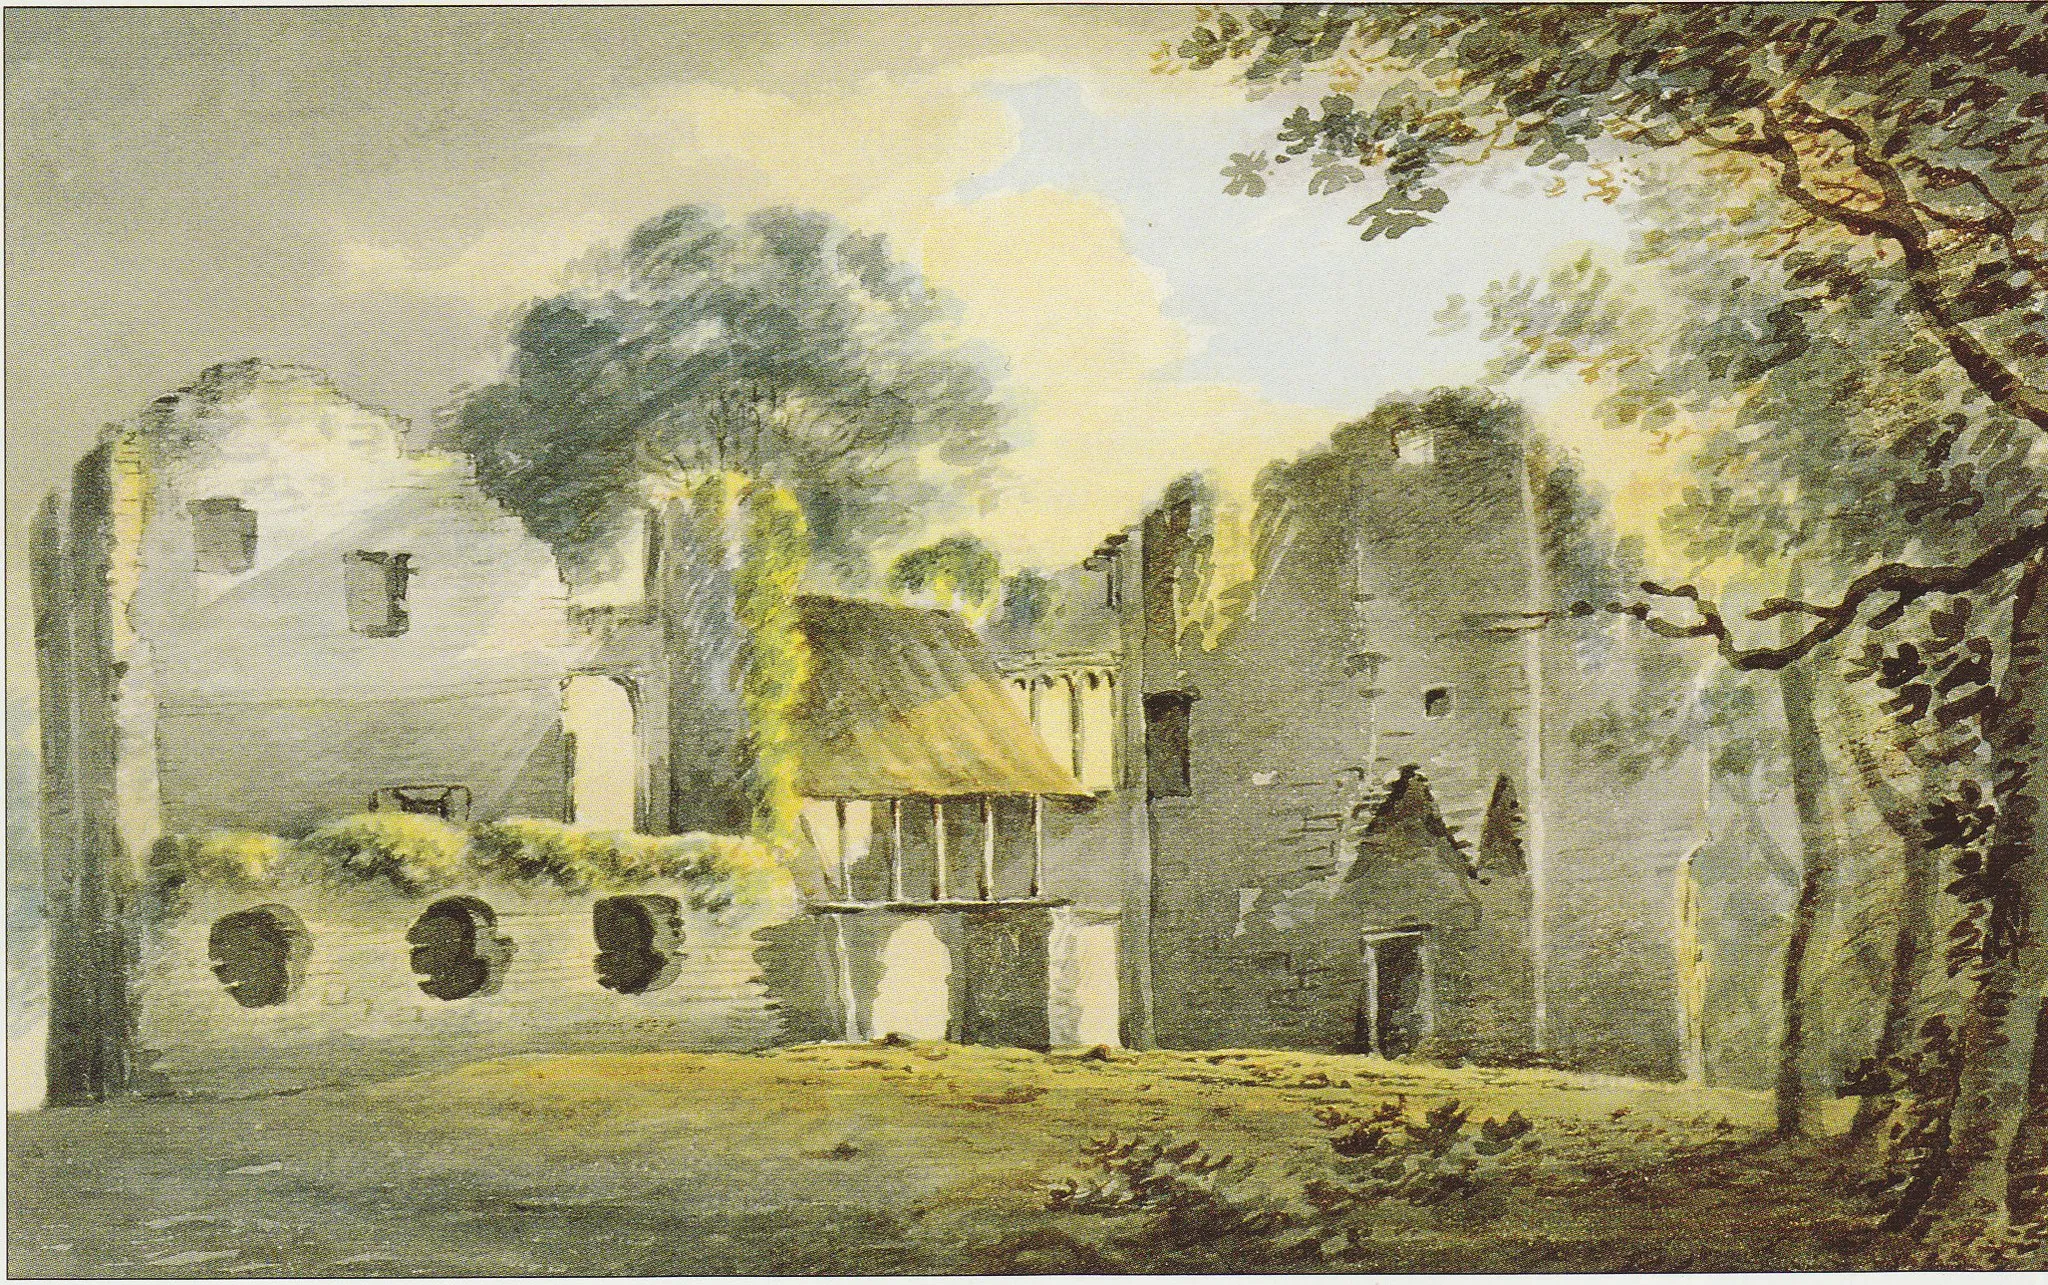 Photo showing: "Inside of Colecombe Castle", watercolour by Rev. John Swete dated 26 January 1795. Devon Record Office 564M/F7/73. Published in Gray, Todd (Ed.), Travels in Georgian Devon: The Illustrated Journals of the Reverend John Swete, 1789-1800, 4 Vols., Vol.2, 1998, Tiverton, p.110